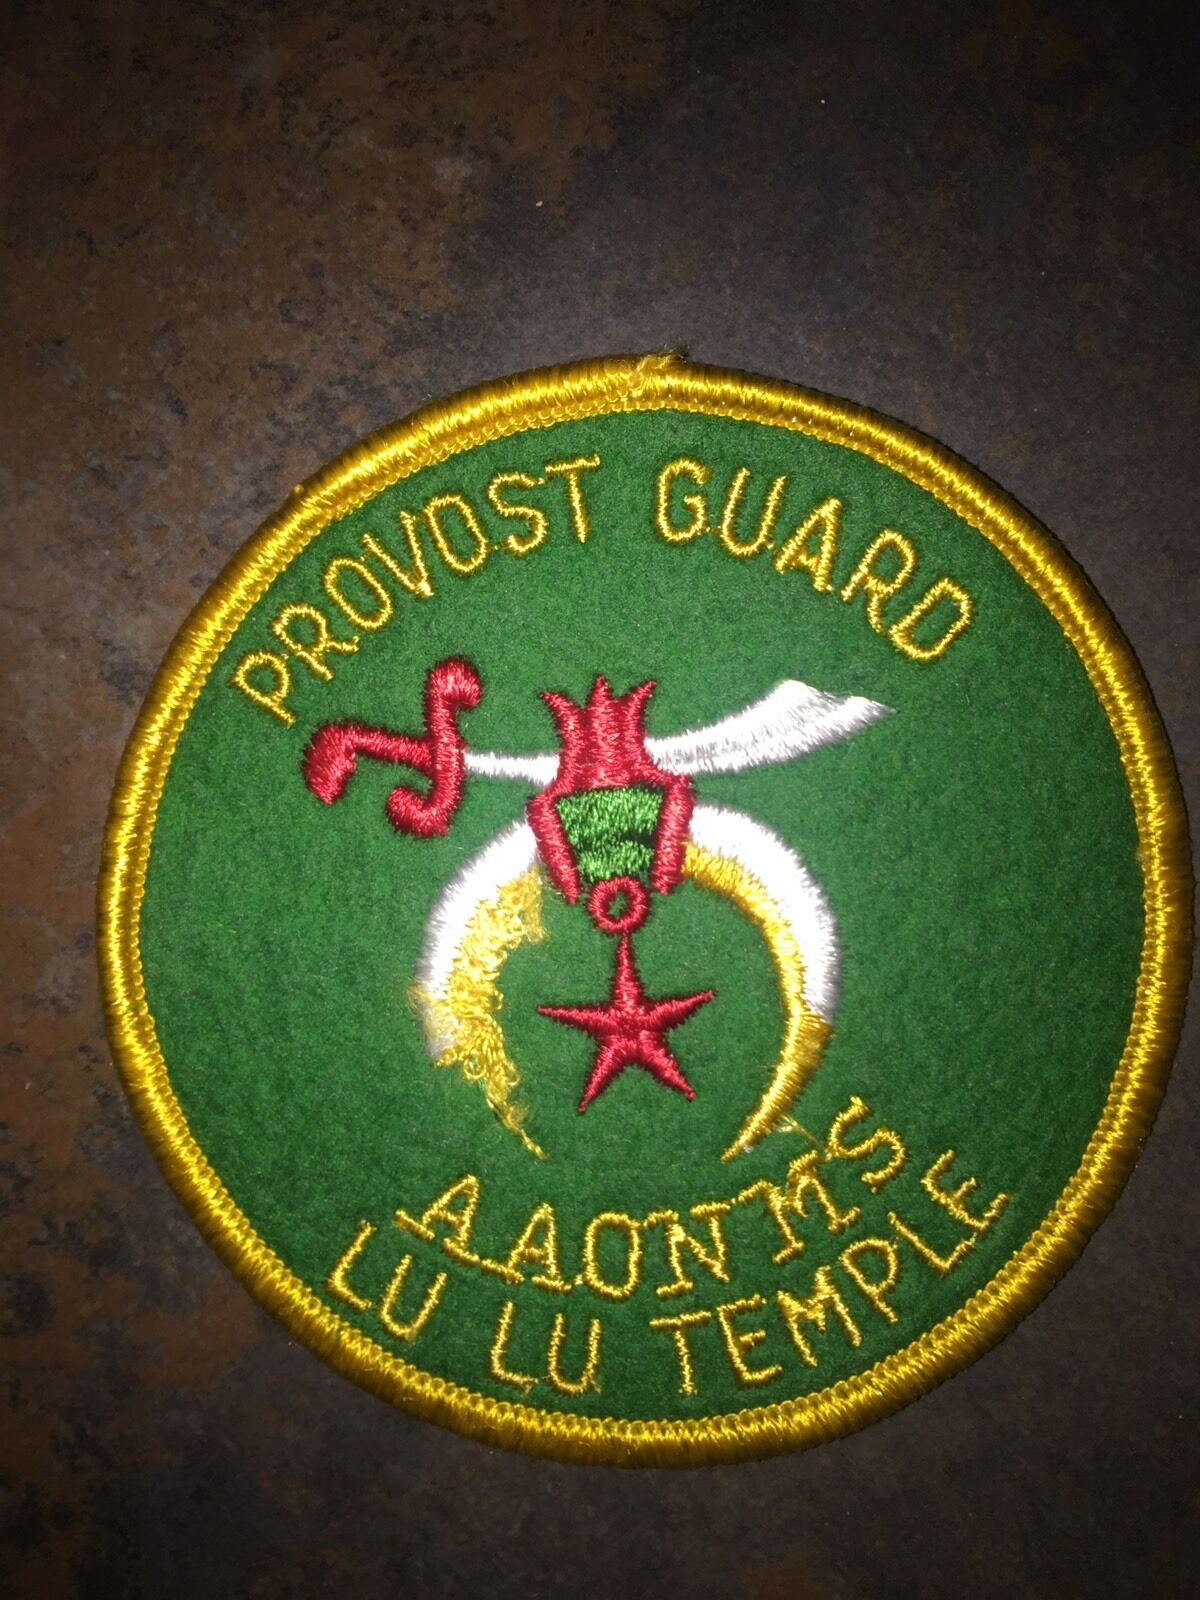 Provost Guard Aaonms Lu Lu Temple Patch Clothing Badge Collectible